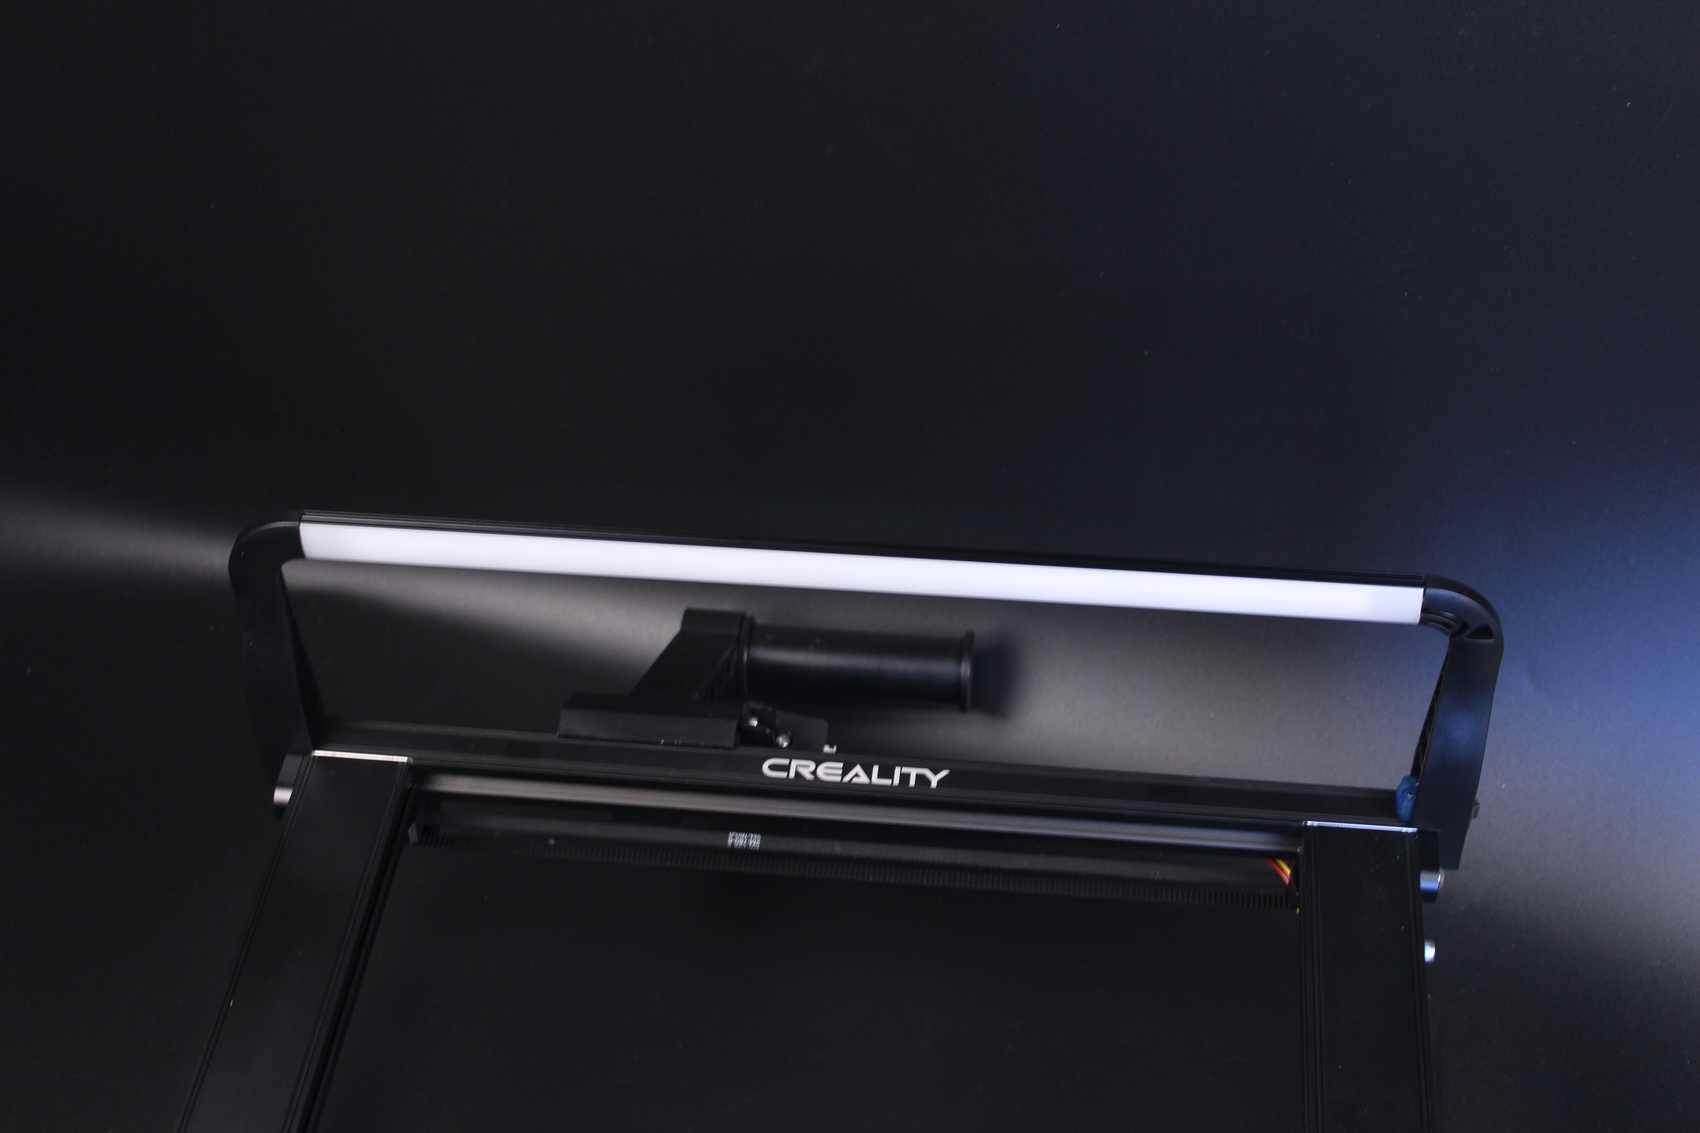 CR 10 Smart Pro LED Light | Creality CR-10 Smart Pro Review: Capable but Pricey